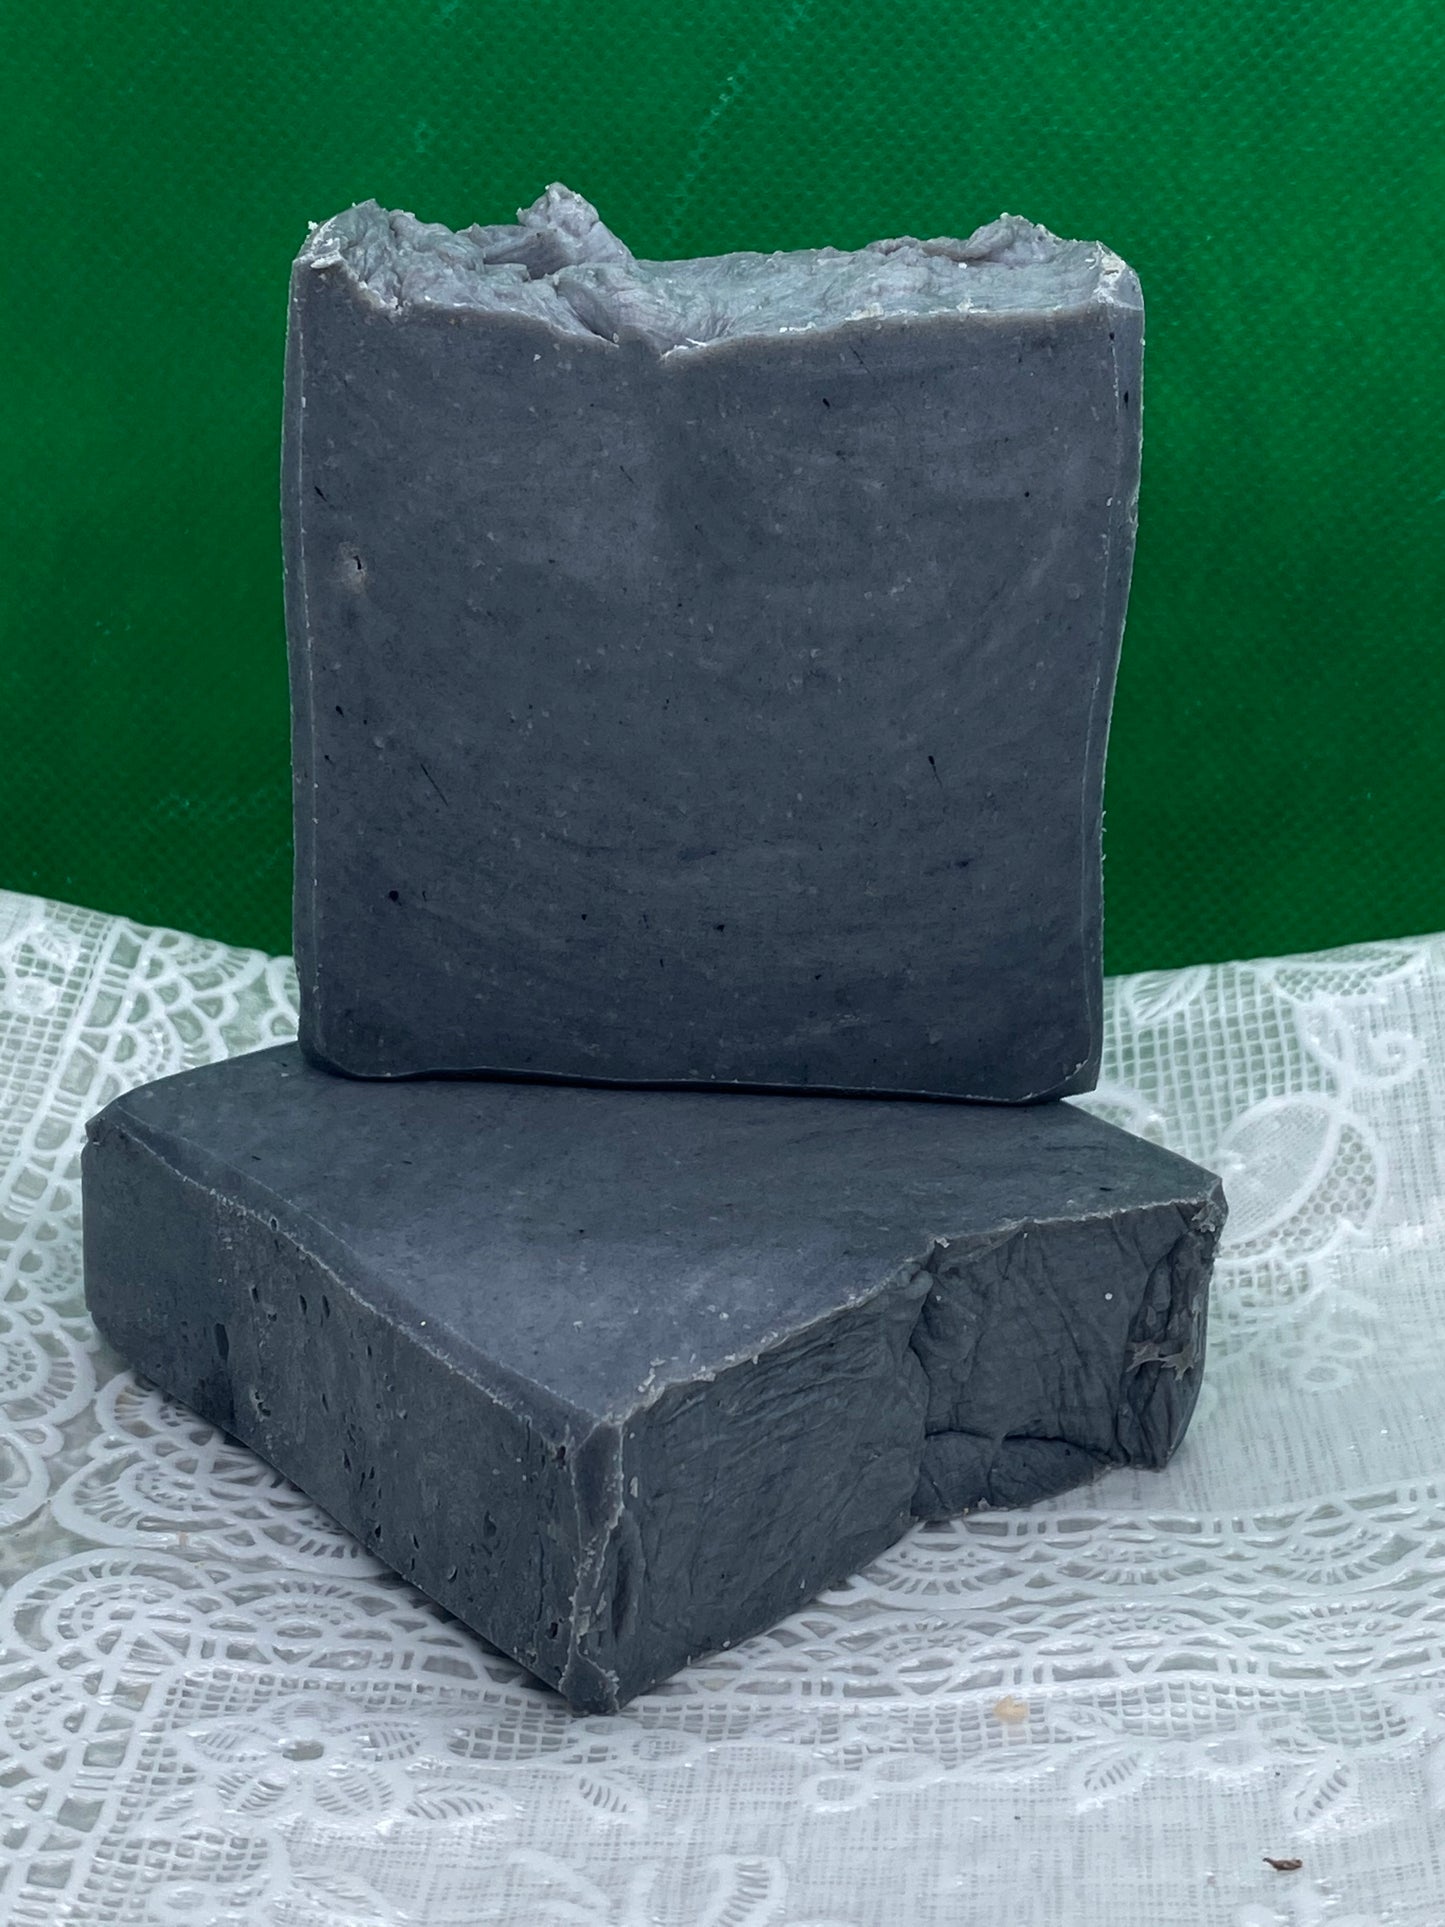 Charcoal soap is an effective and popular detoxifier that removes dirt, pollutants, and bacteria from the body. The beauty industry is seeing an increase in interest in activated charcoal soap effects on the skin, including charcoal soap benefits for face. It is beneficial for acne treatment, antiaging, and psoriasis treatment.